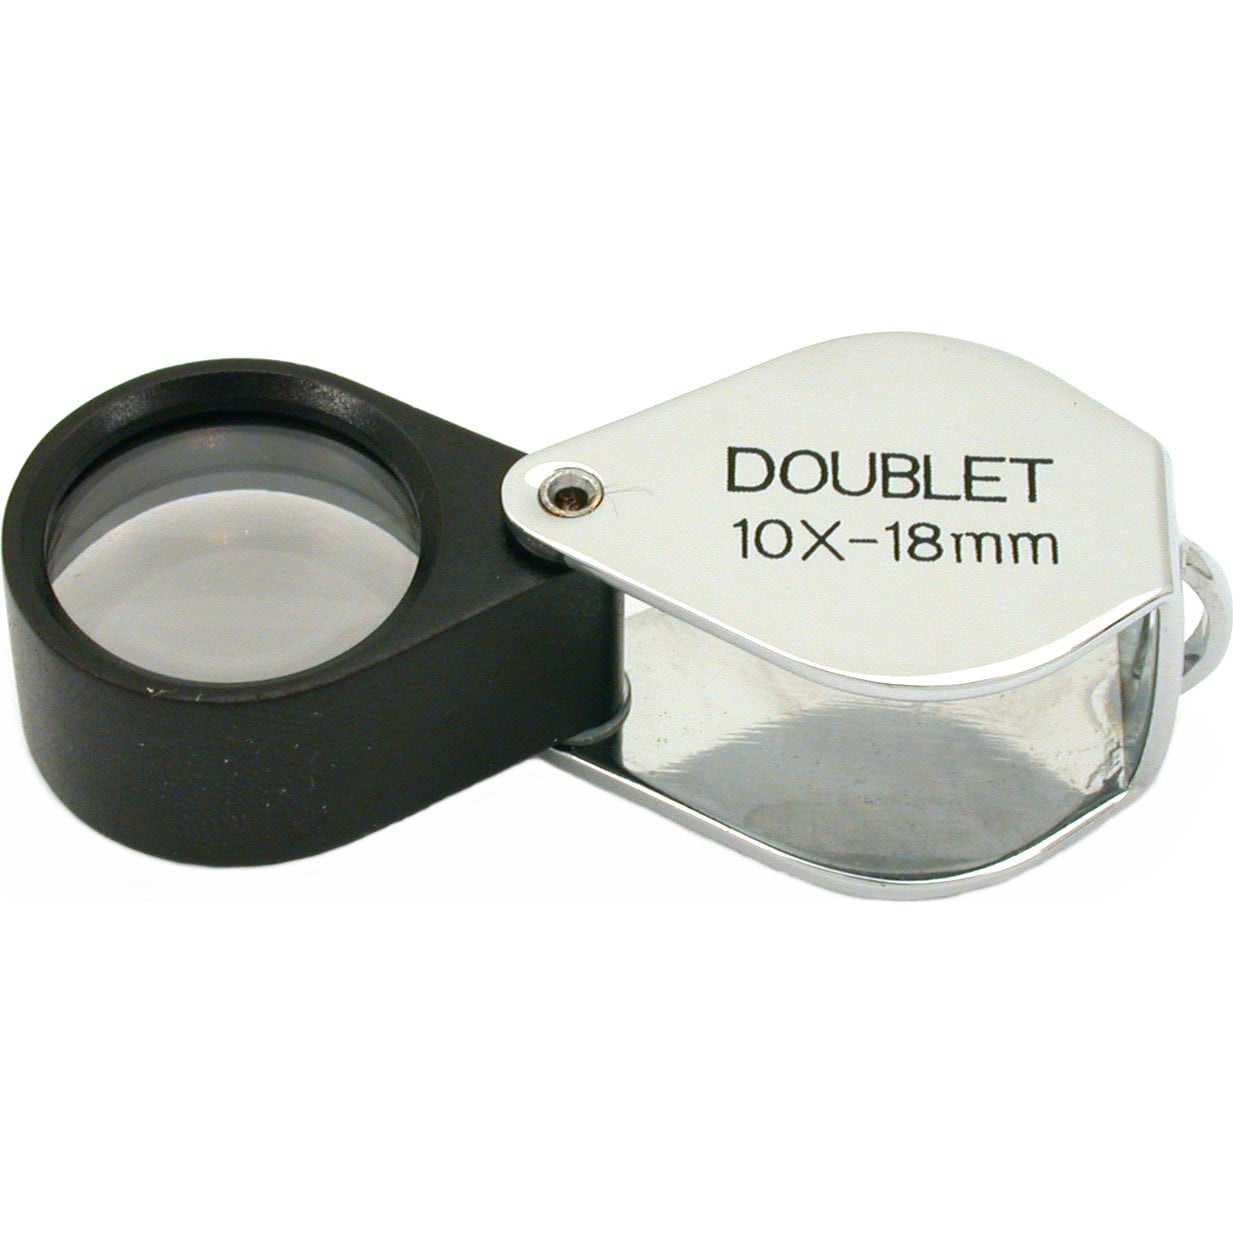 Noa Store 10x Jewelers Loupe Set - 2 Magnifiers for Jewelers &  Photographers, 3.54 H 2.44 L 1.14 W - Kroger